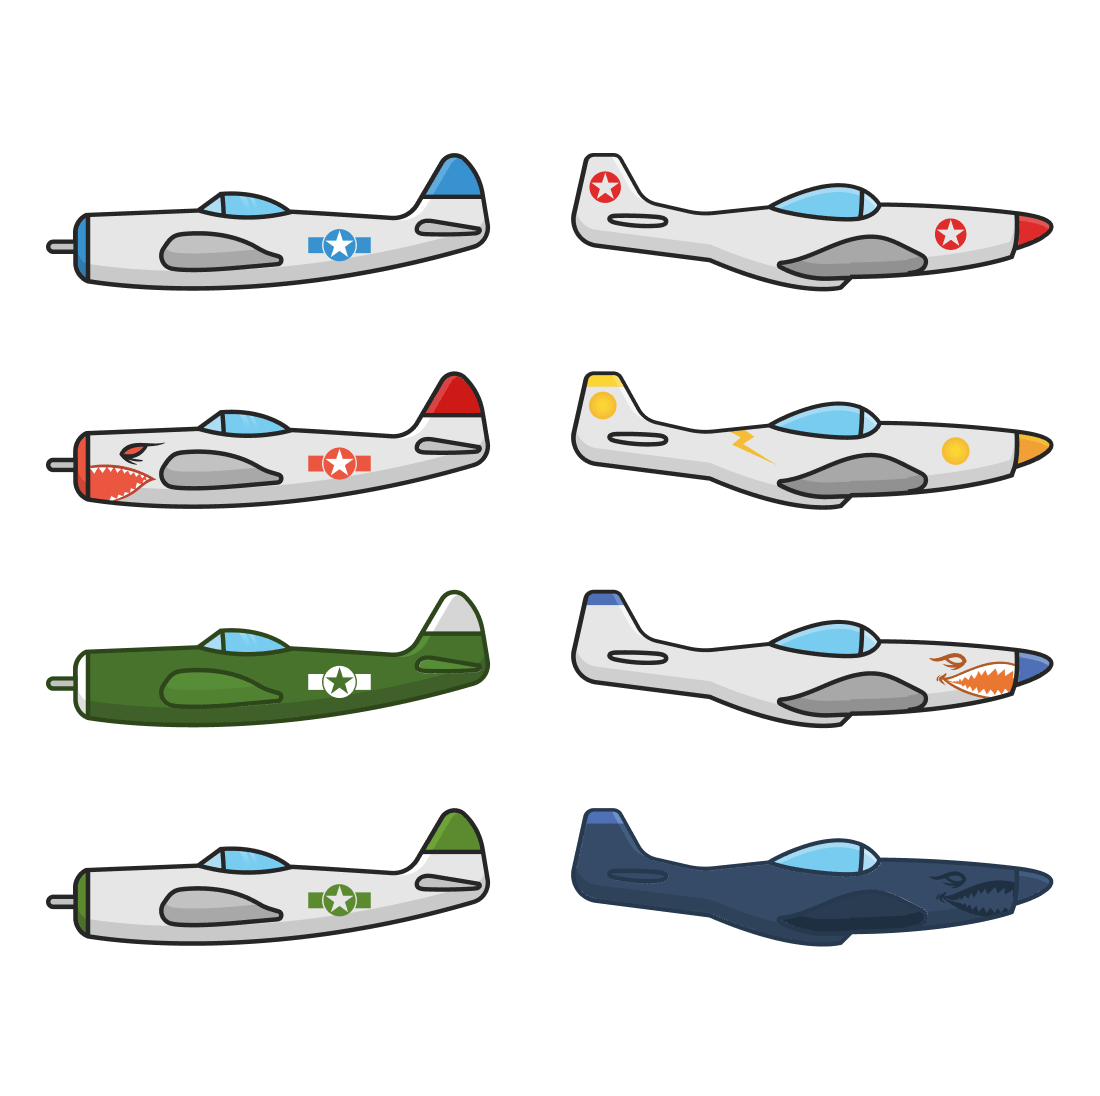 Colored military planes with pictures on them.